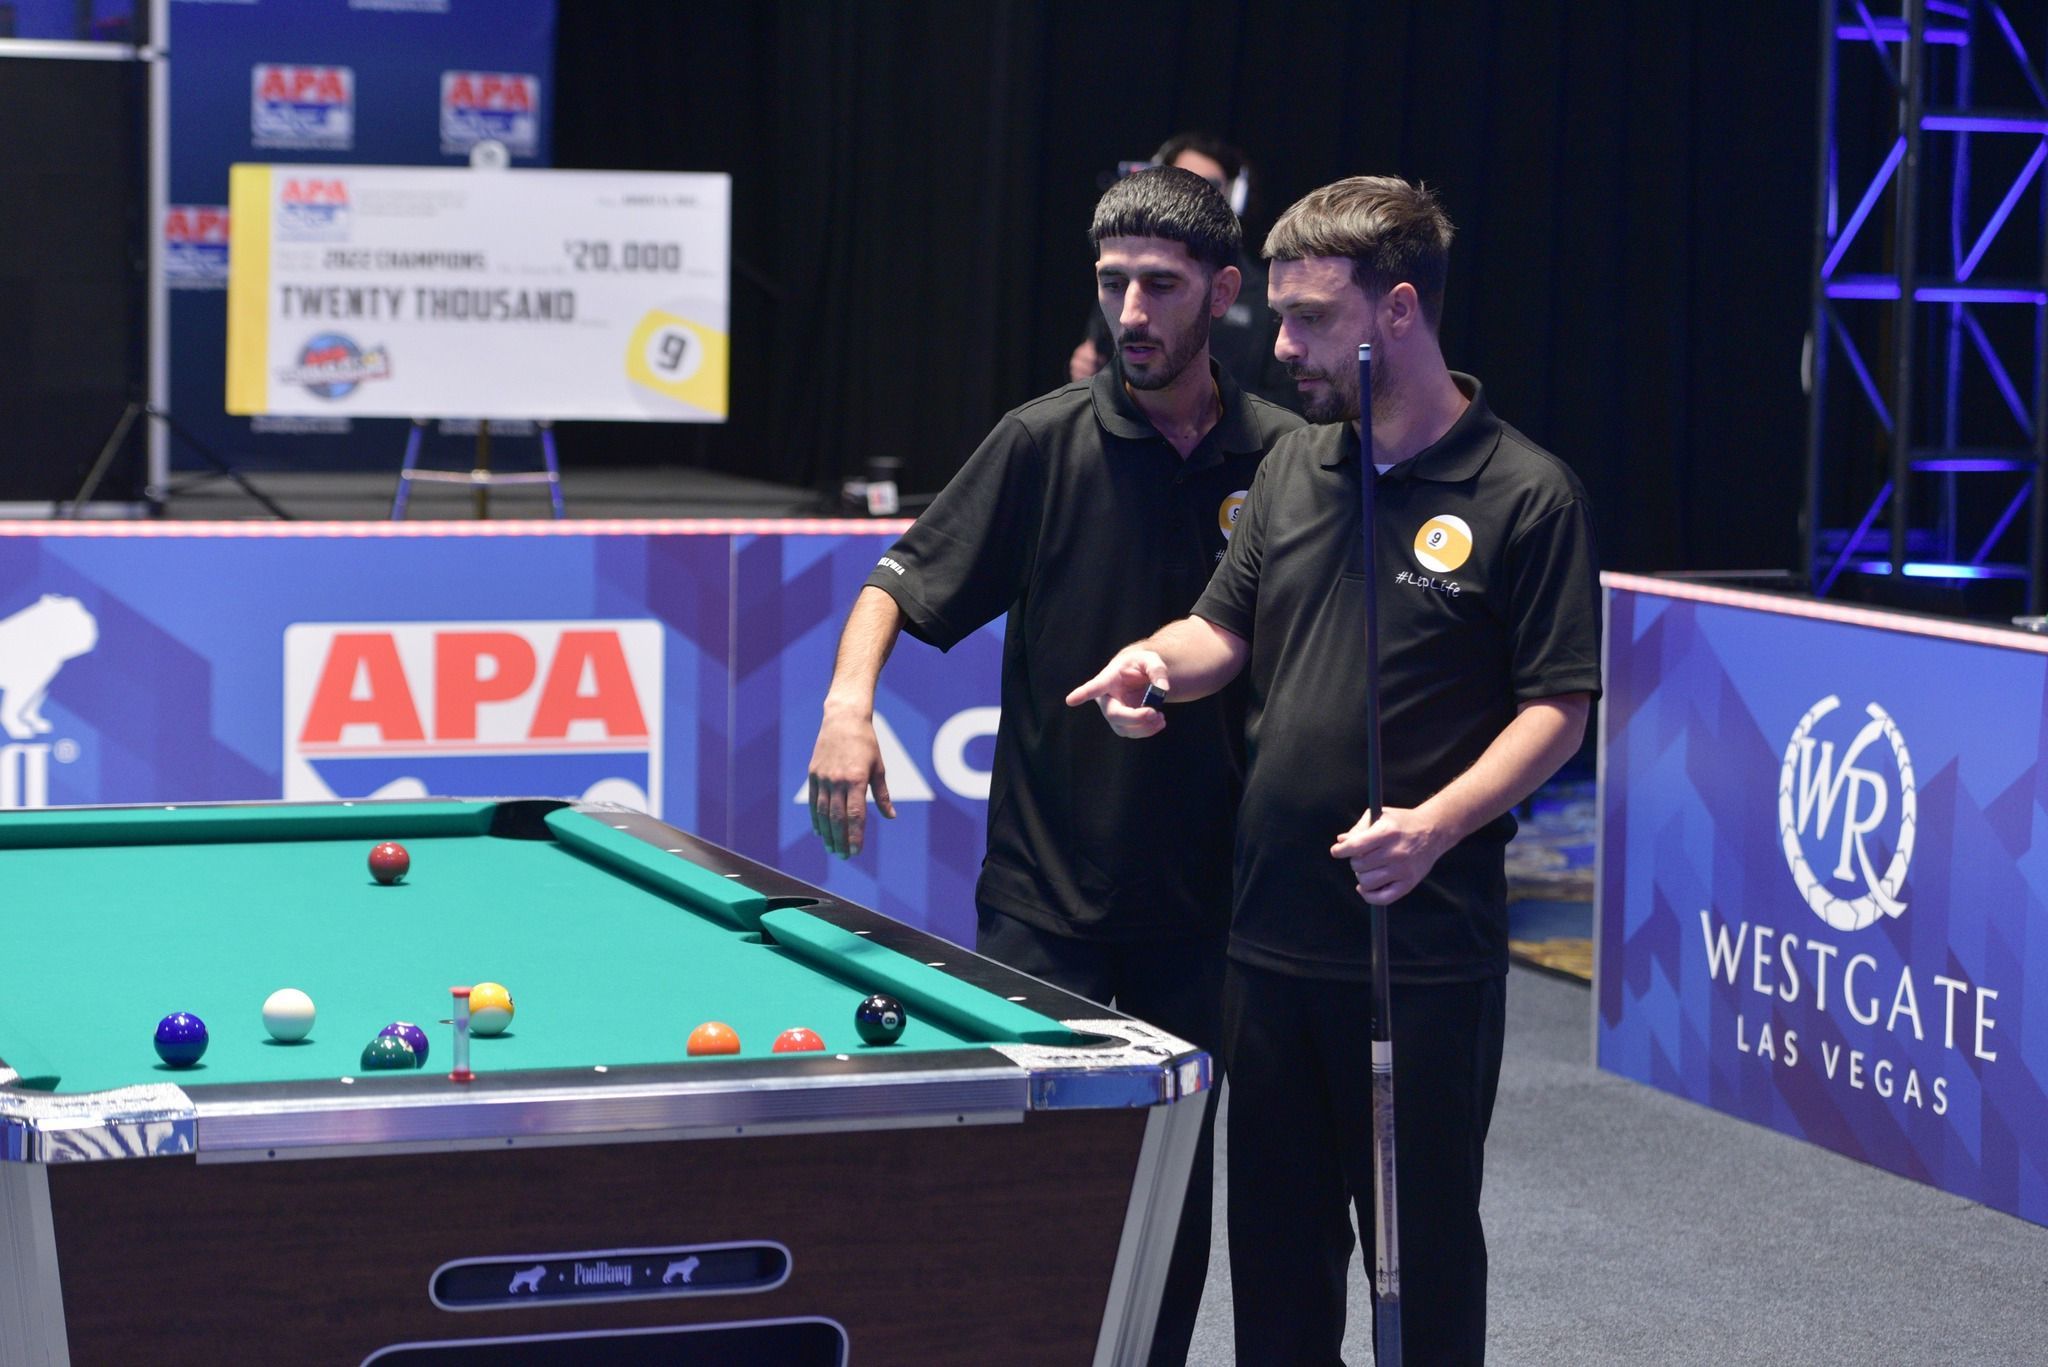 Philly comes in first at the World Pool Championship in Las Vegas image picture